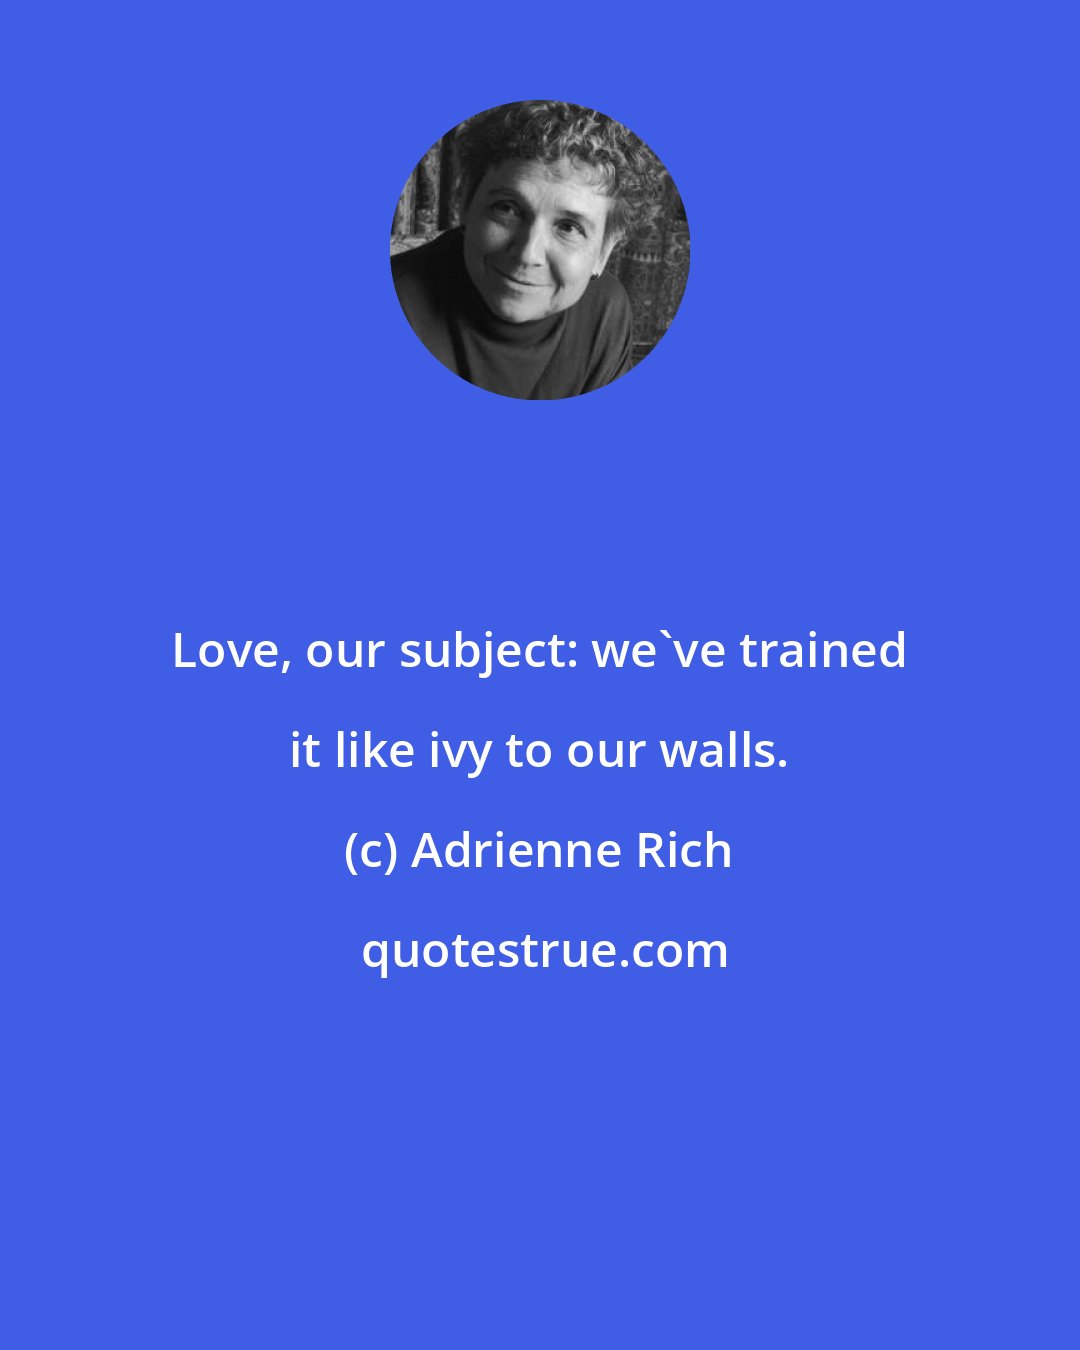 Adrienne Rich: Love, our subject: we've trained it like ivy to our walls.